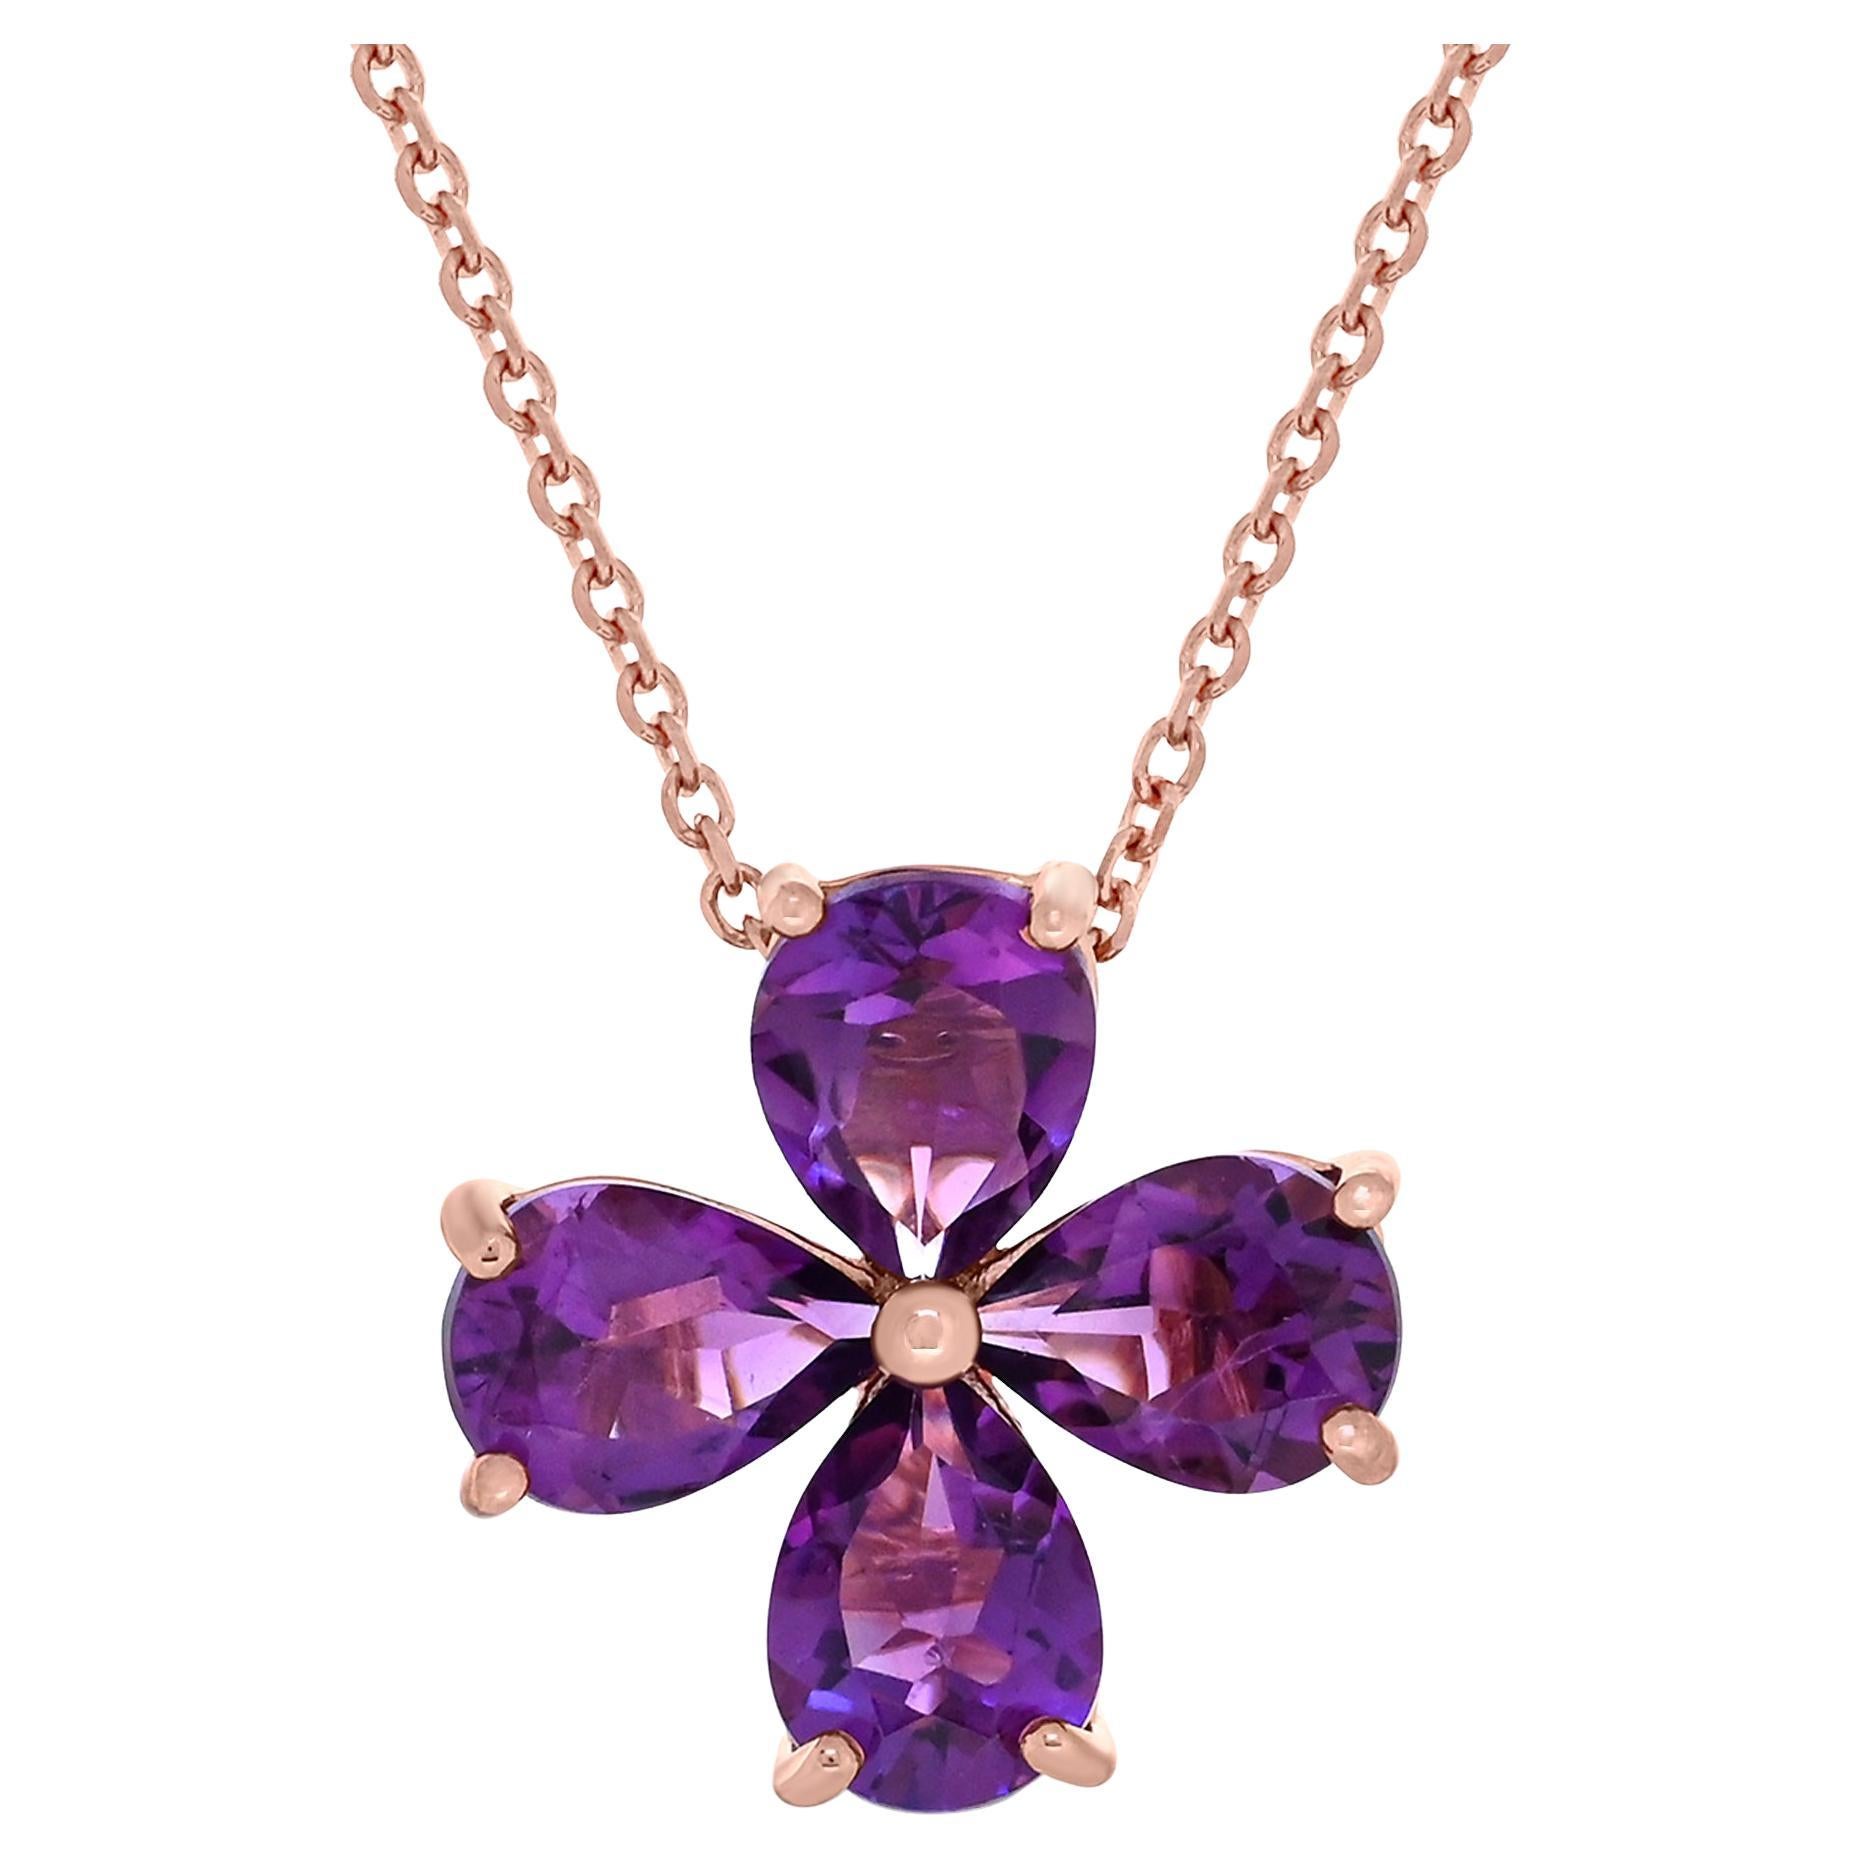 3-3/8 ct. Amethyst Floral Pedant Necklace in 14K Rose Gold over Sterling Silver